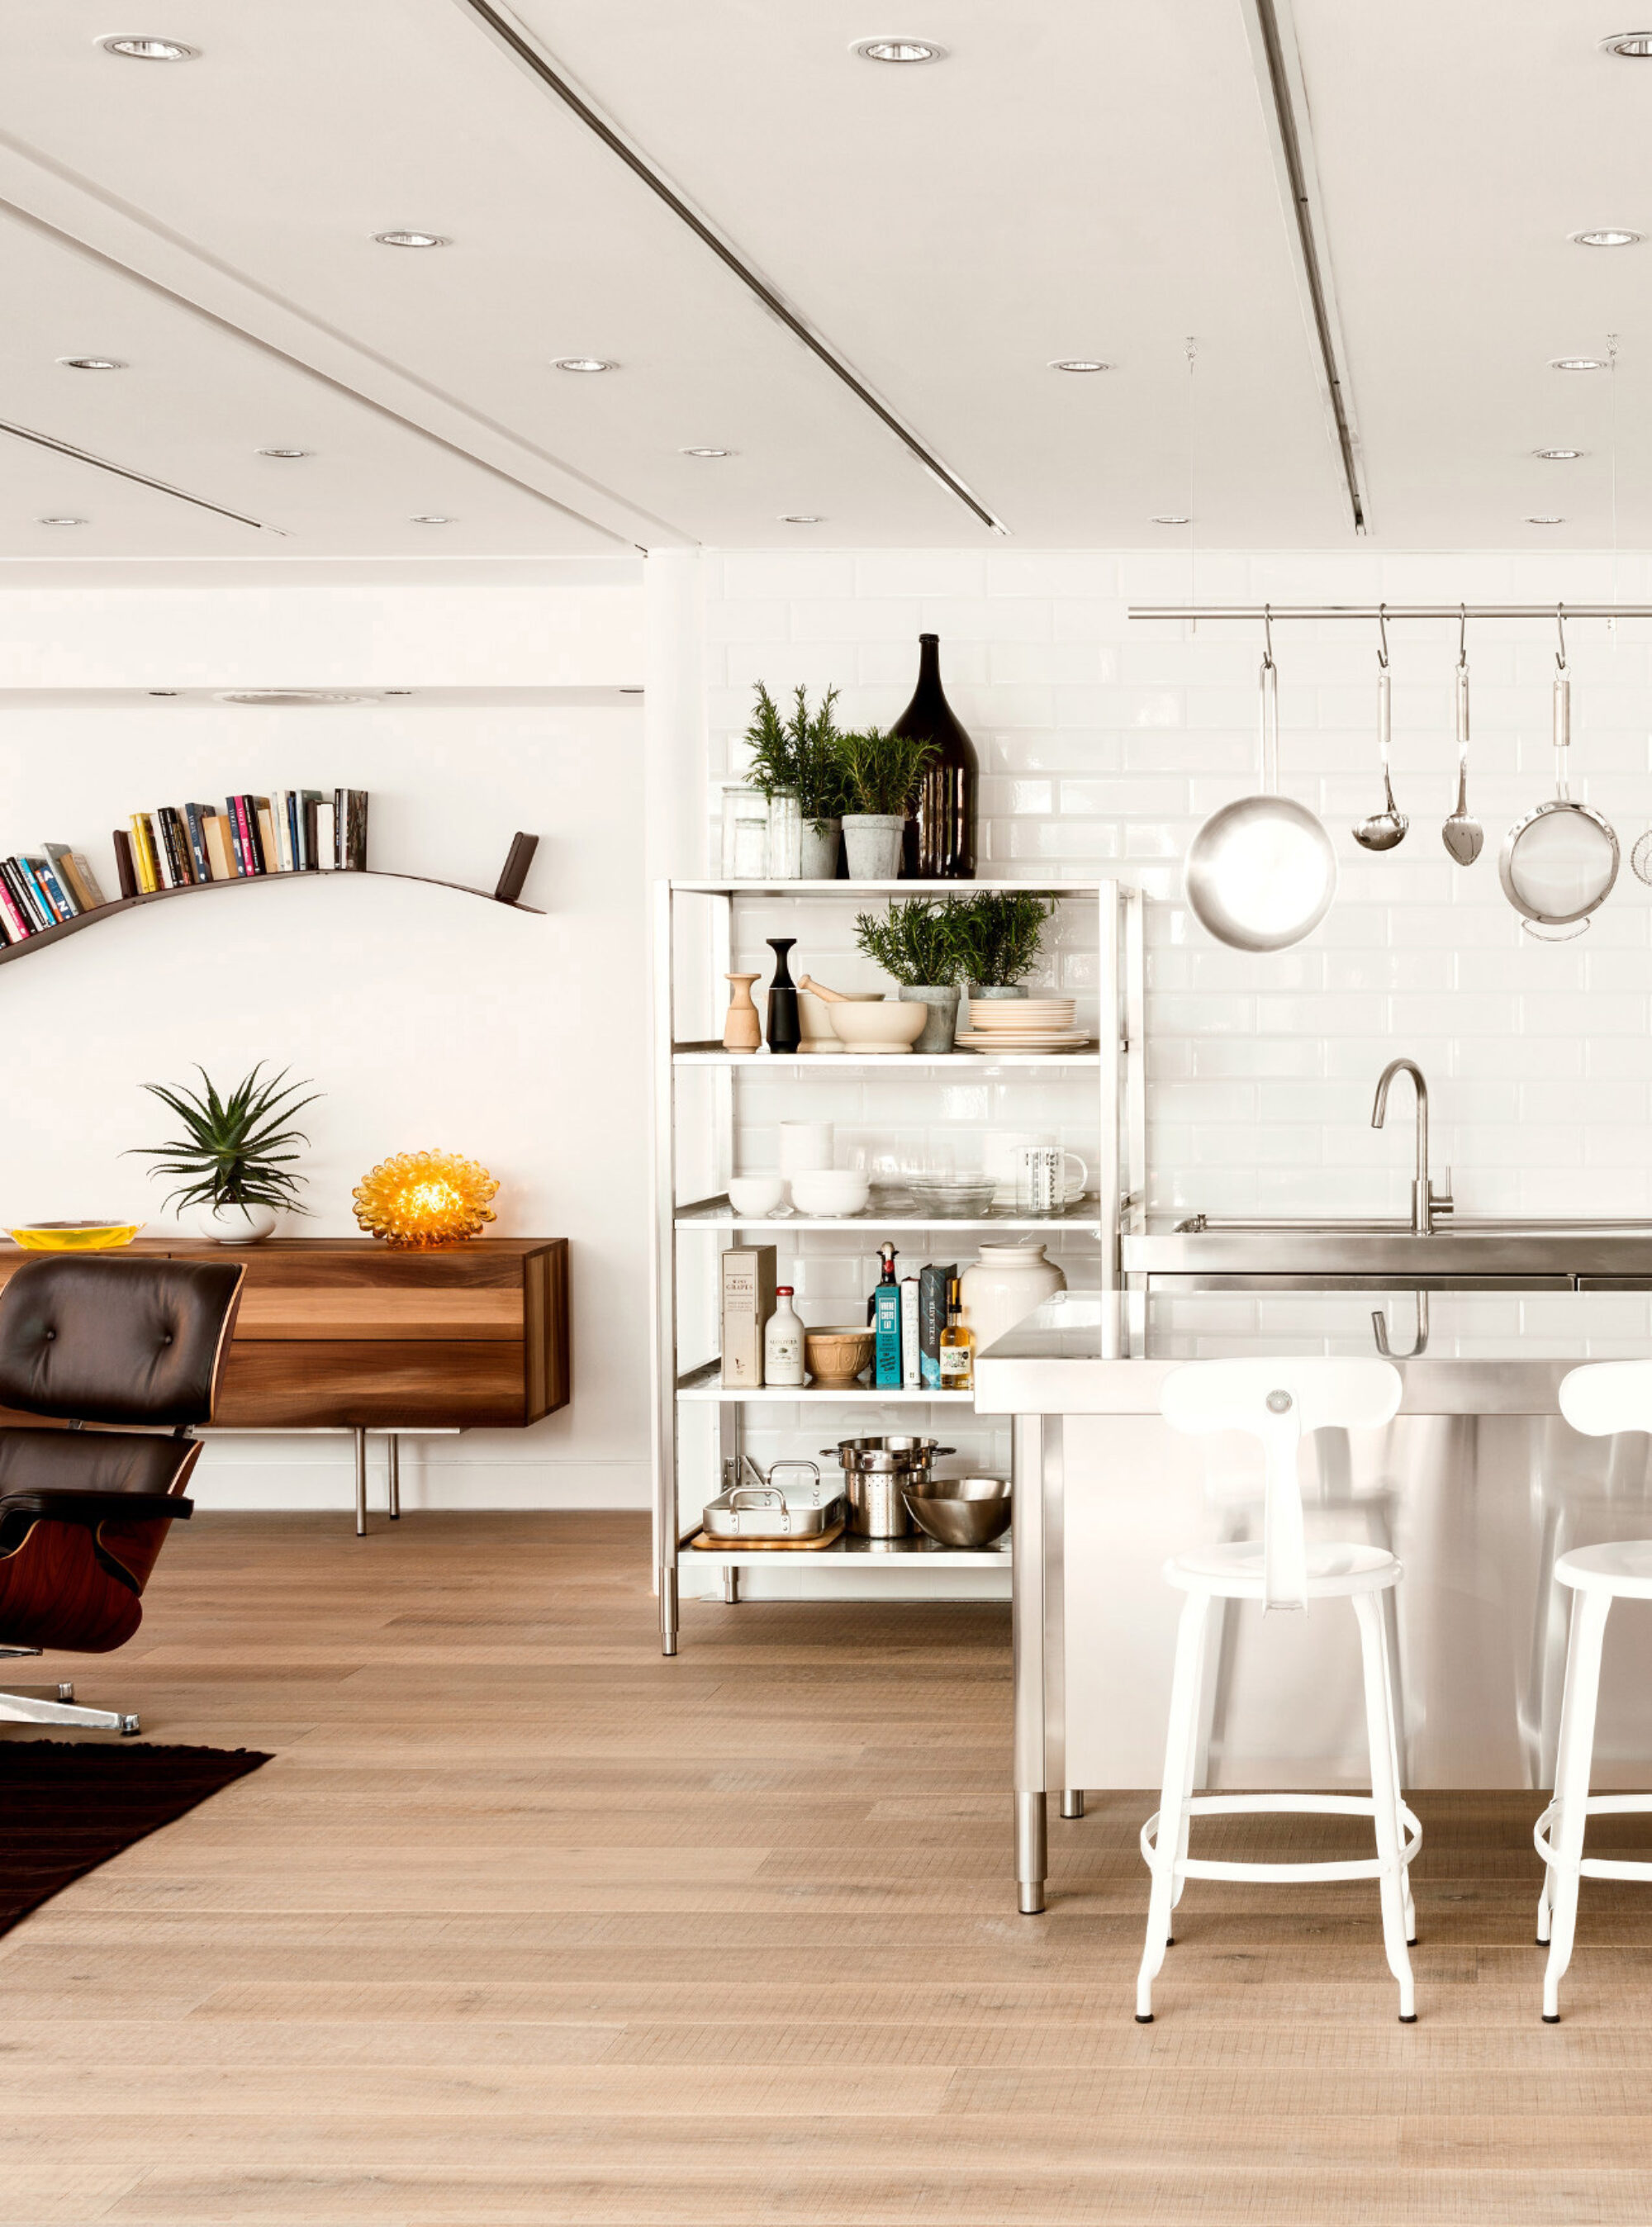 Oak tate skye plank in the conran store with open kitchen shelving and a eames lounge chair